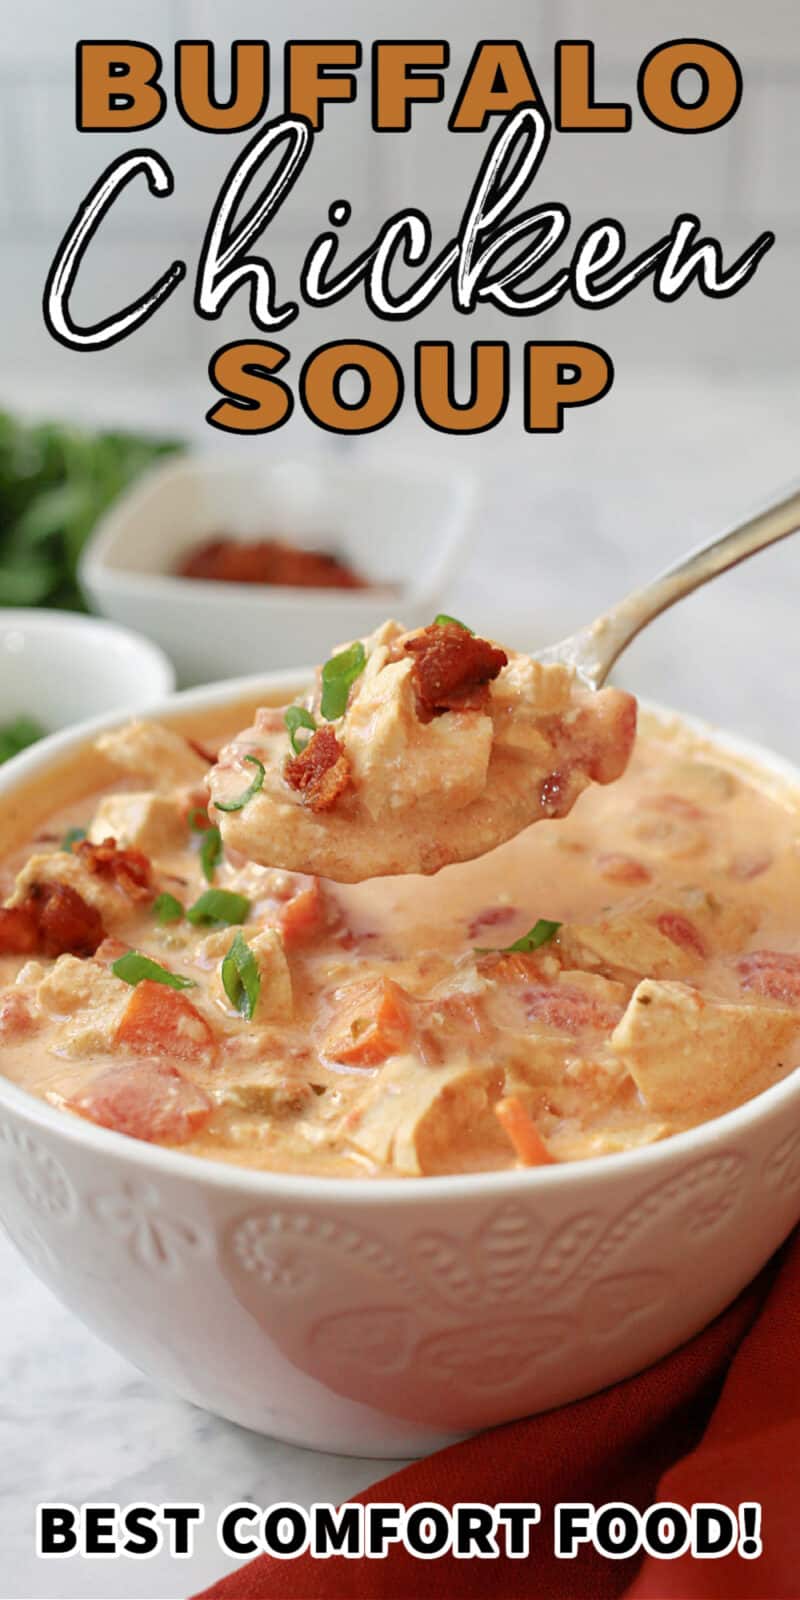 buffalo chicken soup with text